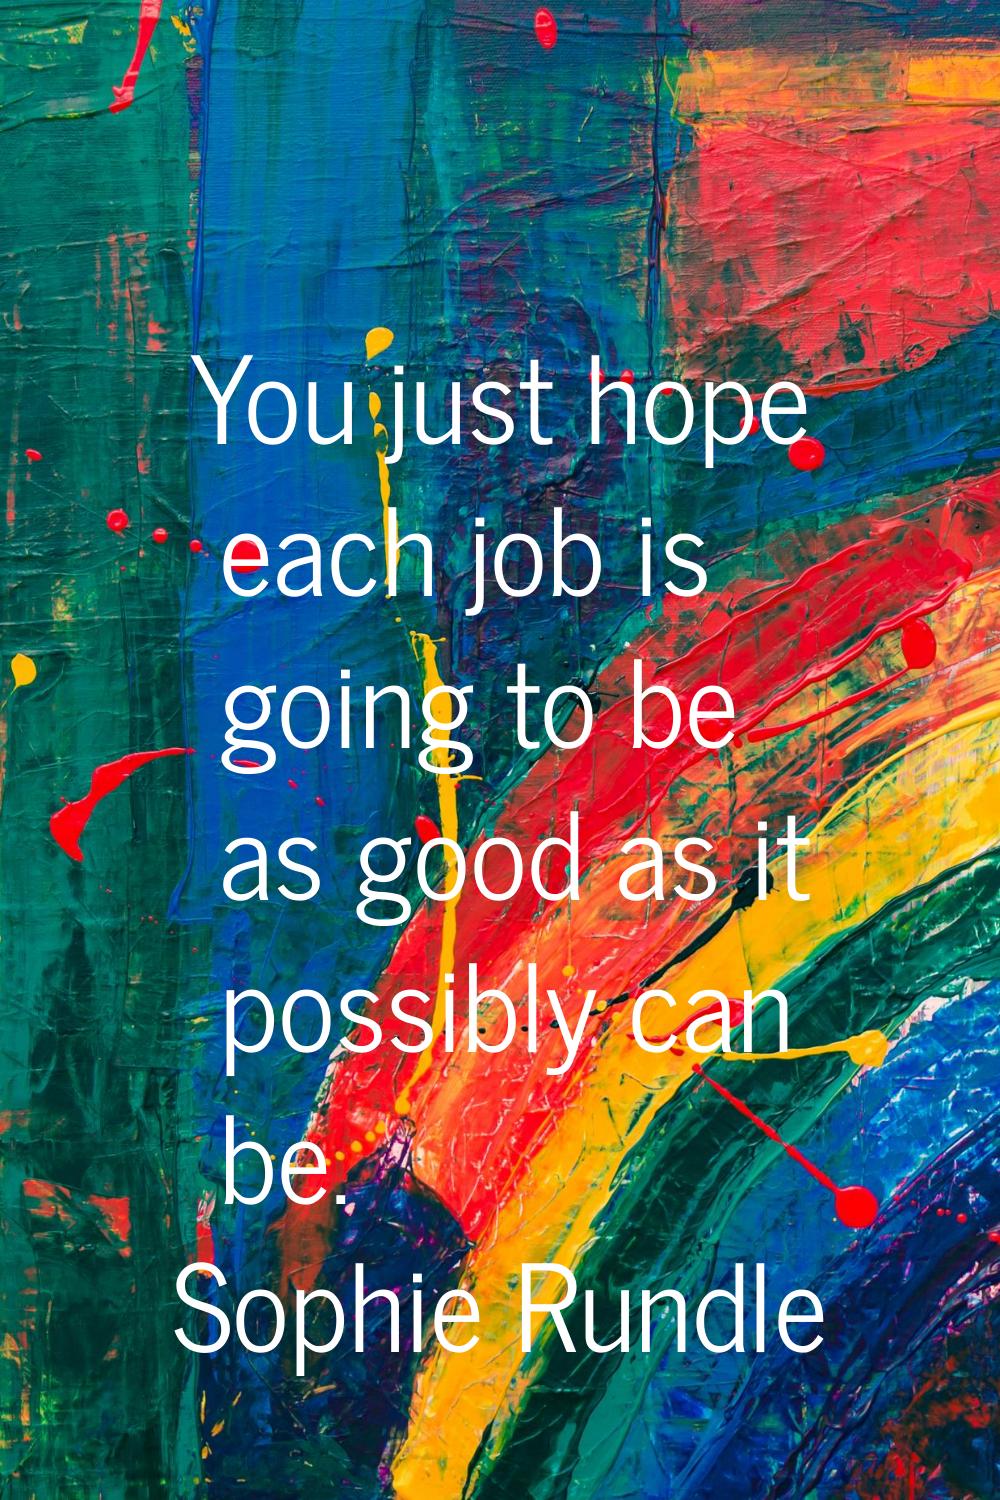 You just hope each job is going to be as good as it possibly can be.